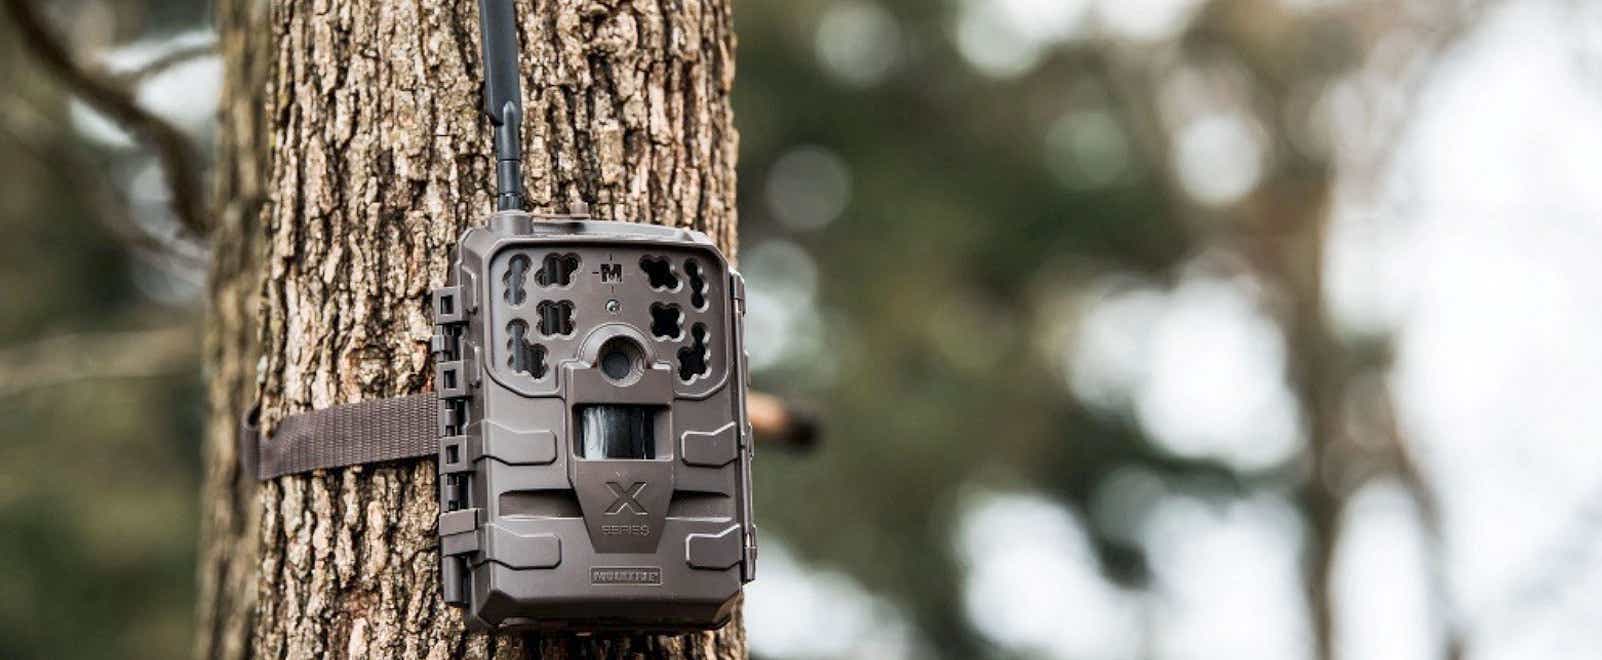 Trail camera positioned on a tree